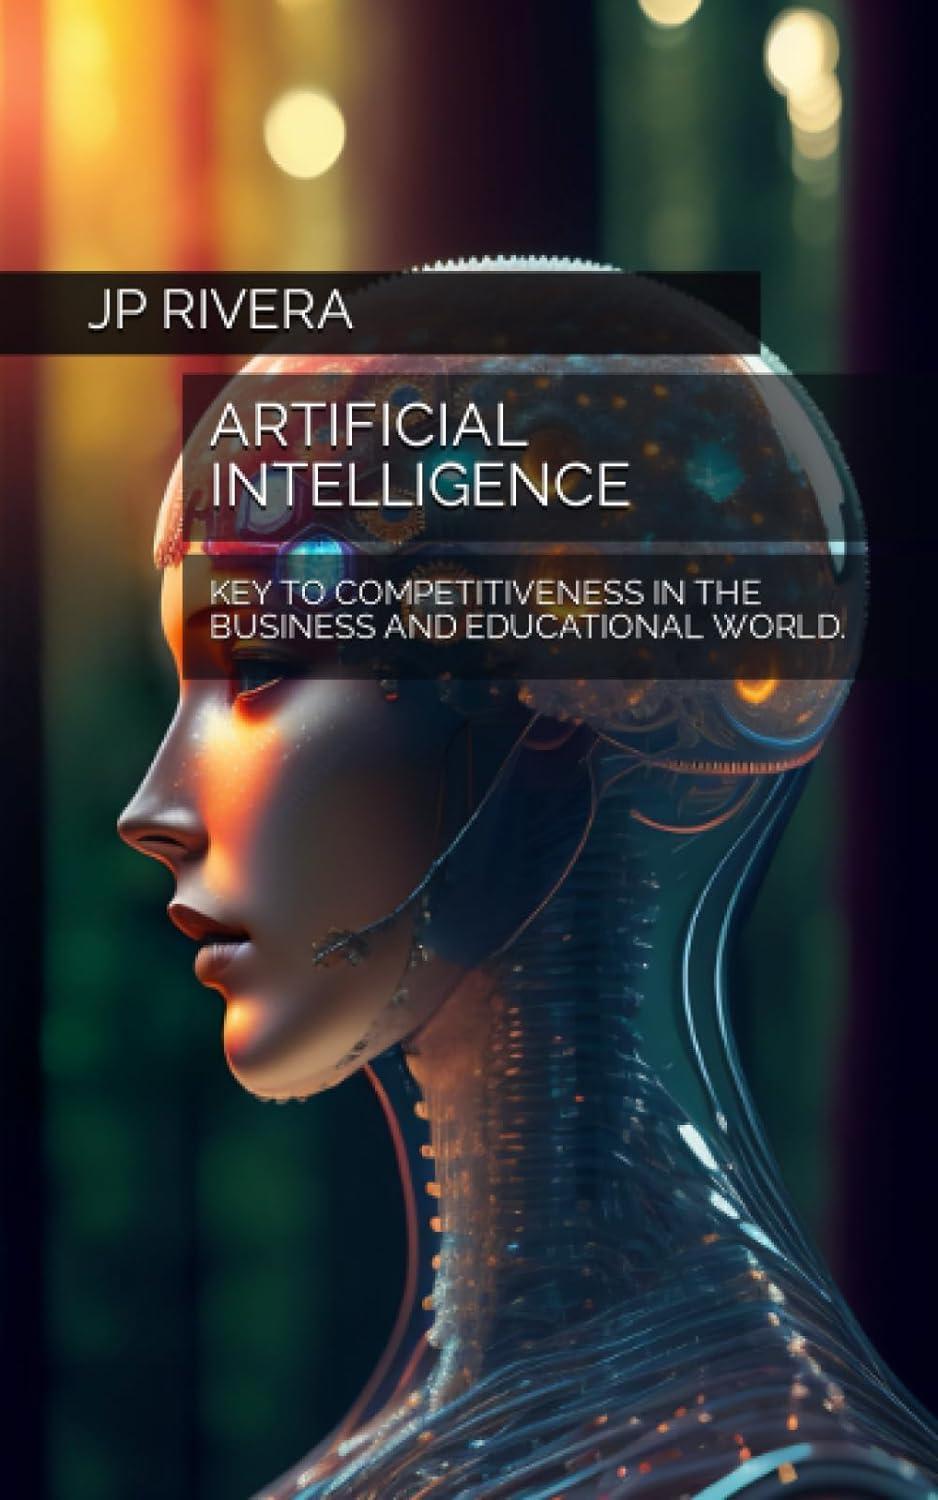 artificial intelligence key to competitiveness in the bussiness and educational world 1st edition jp rivera